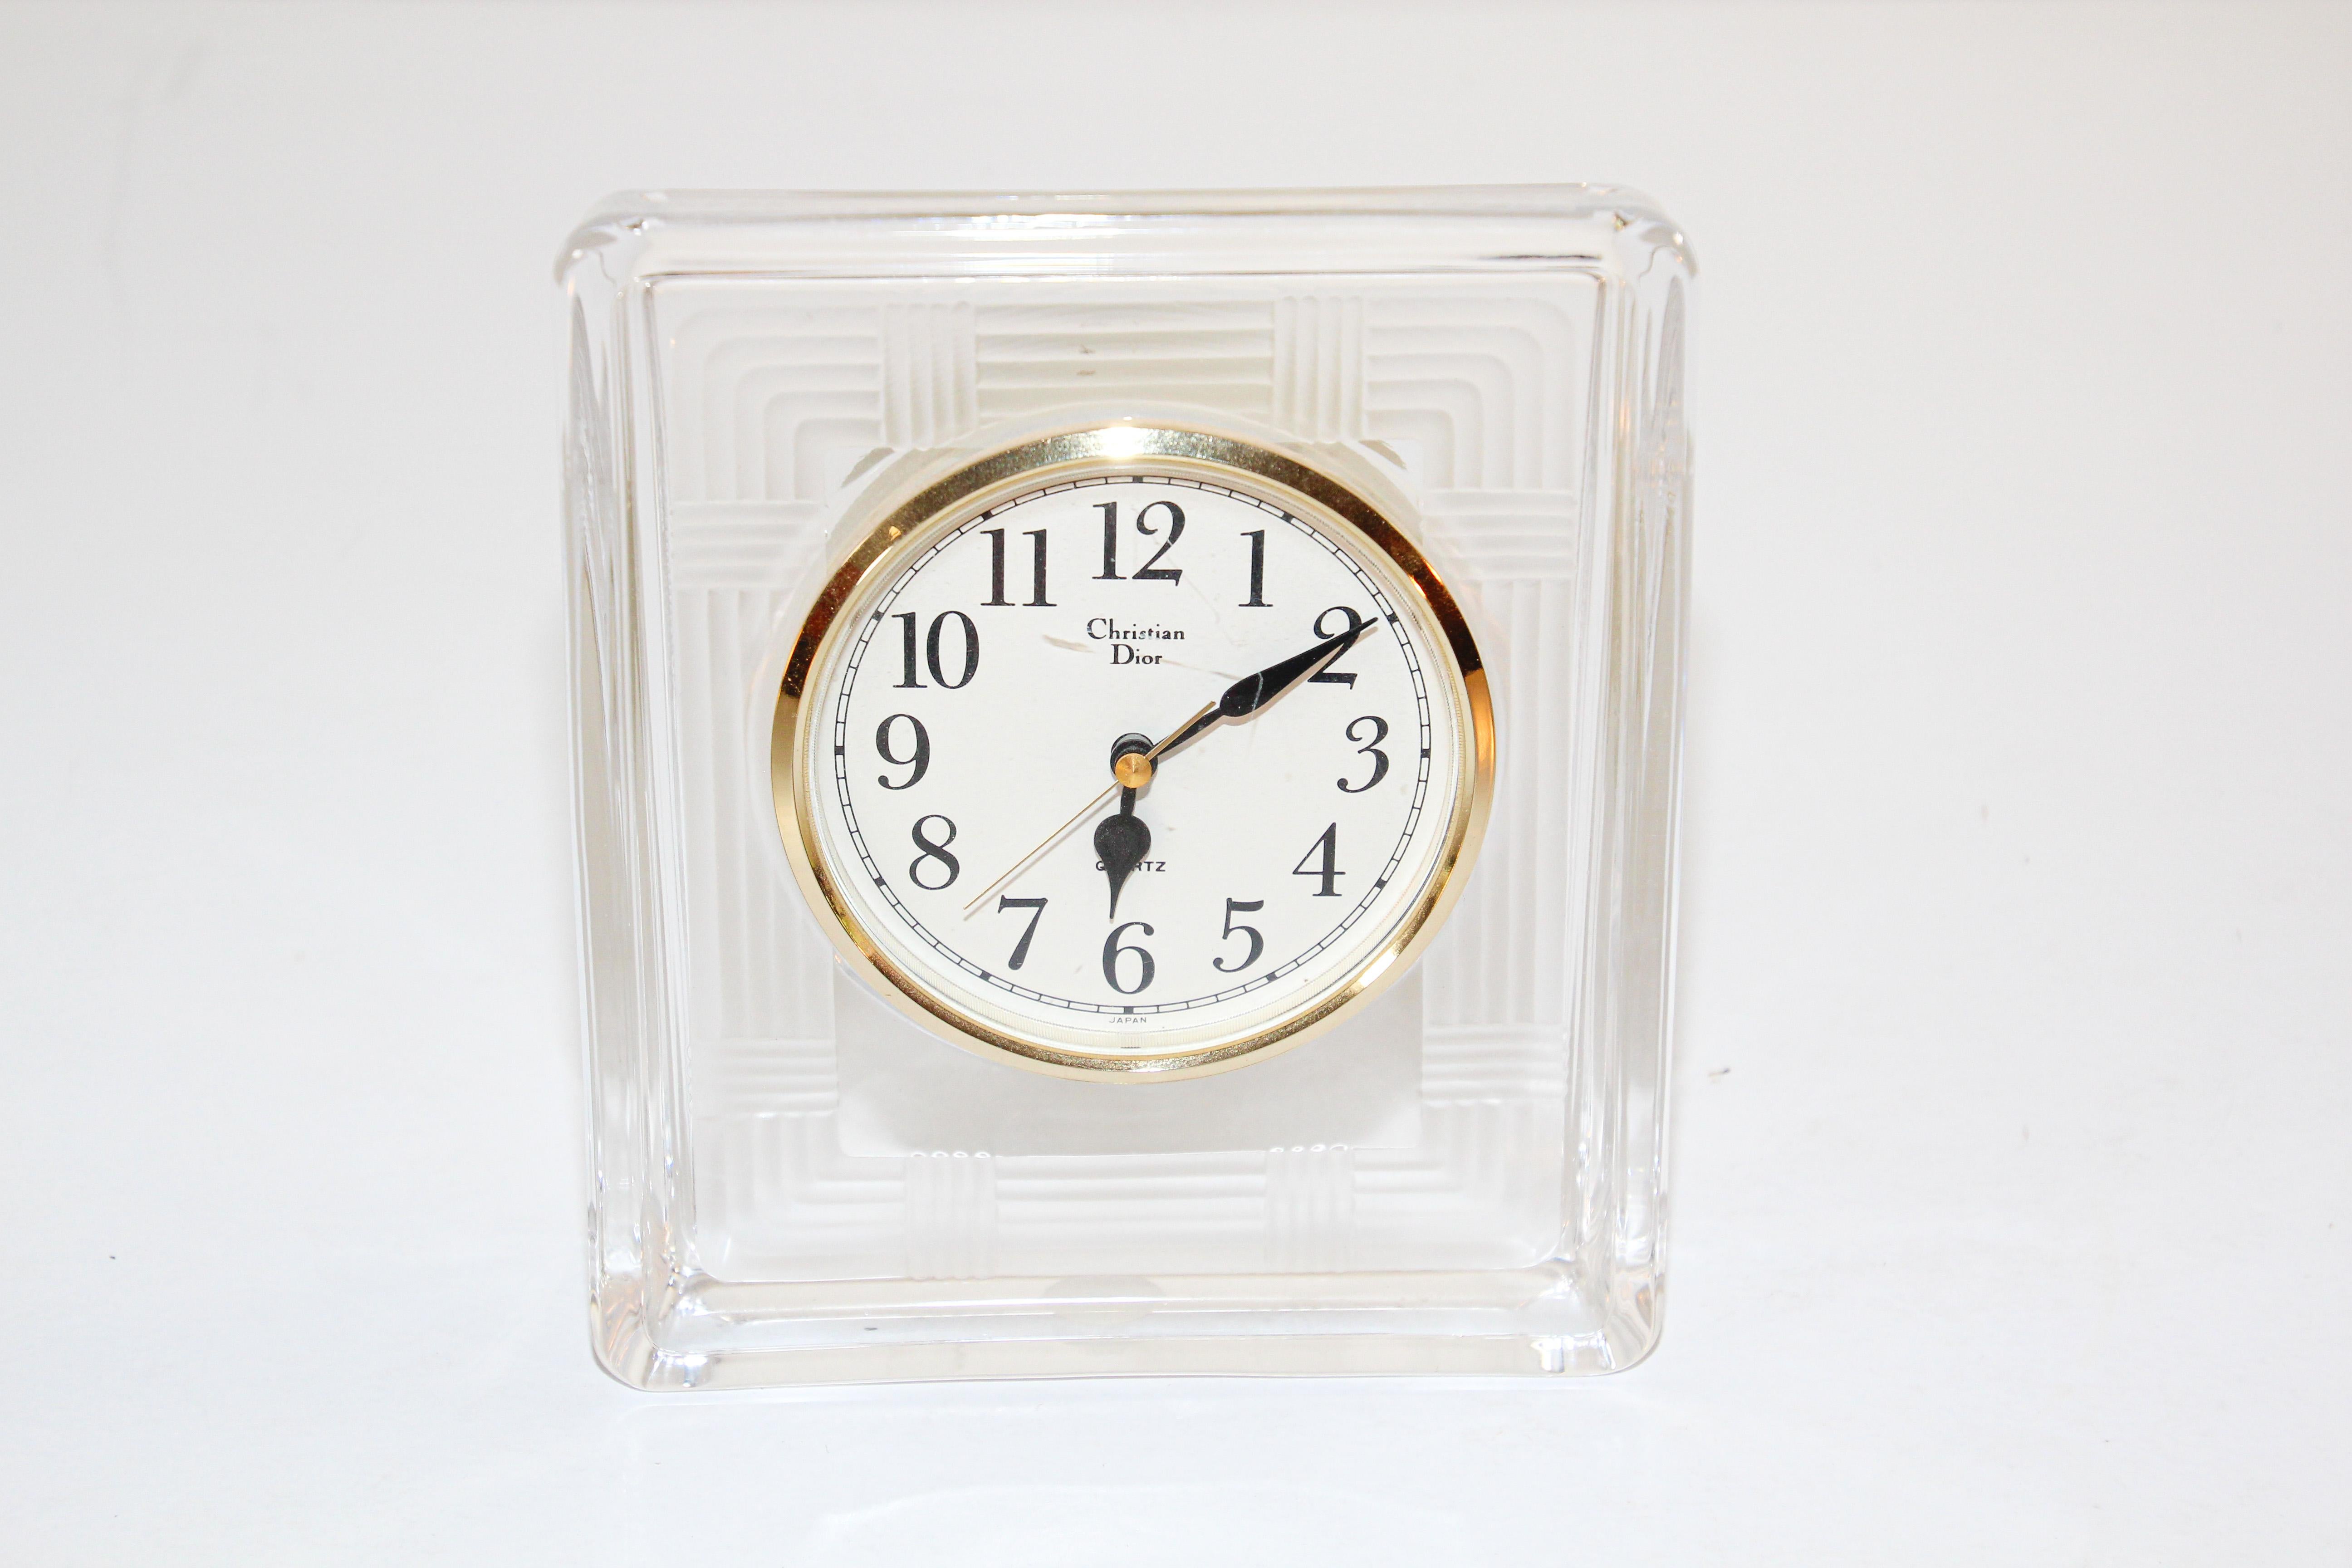 Christian Dior vintage glass desk clock,
A classy, vintage glass and brass desk clock from Christian Dior. The clock is brass with beige background and black numbers. 